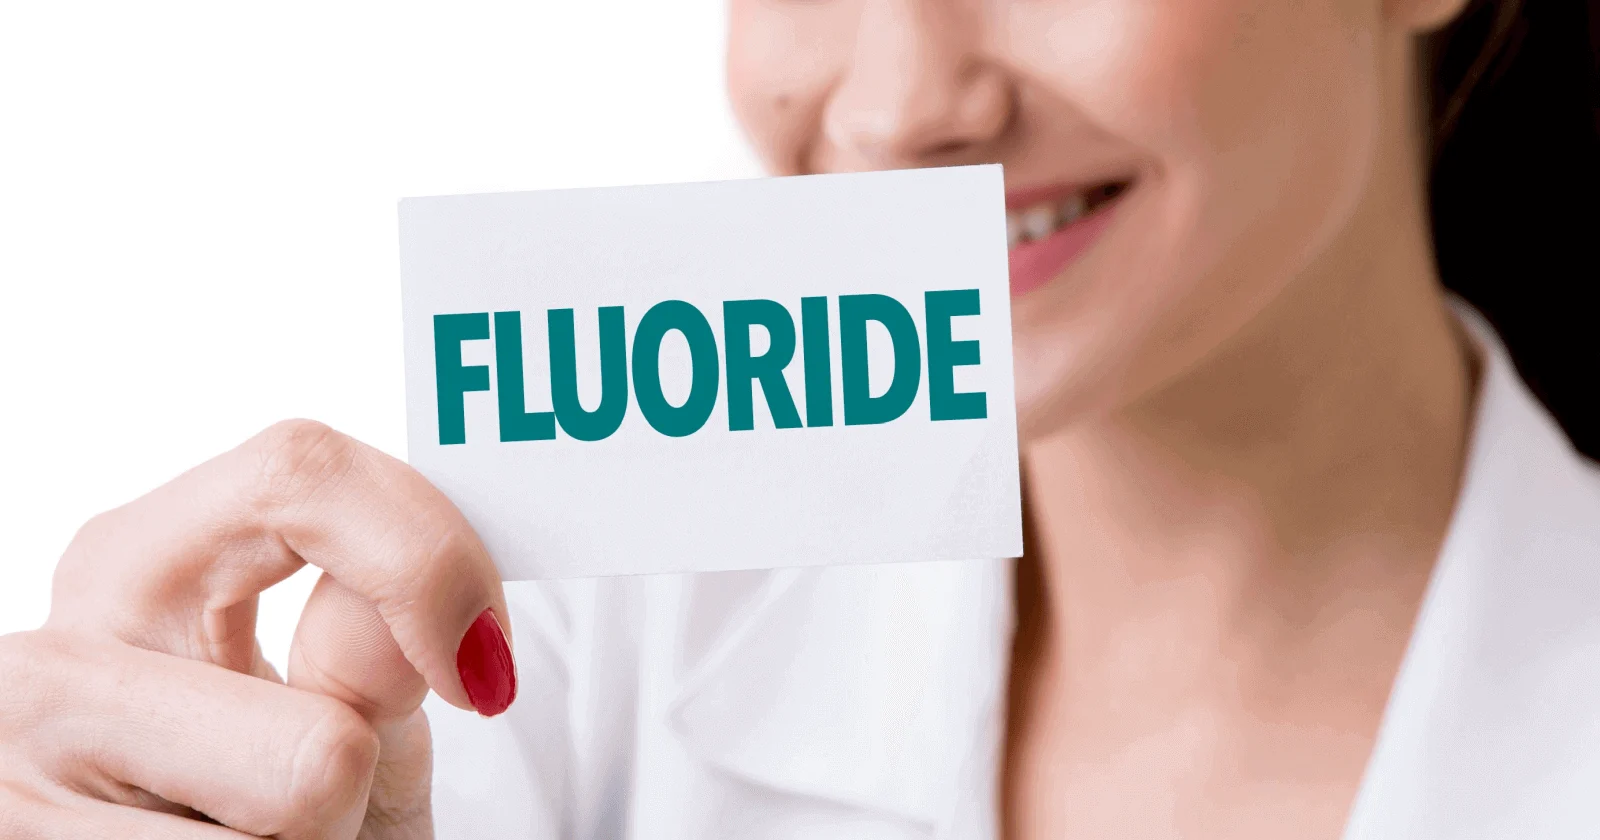 The impact of fluoride on dental health
